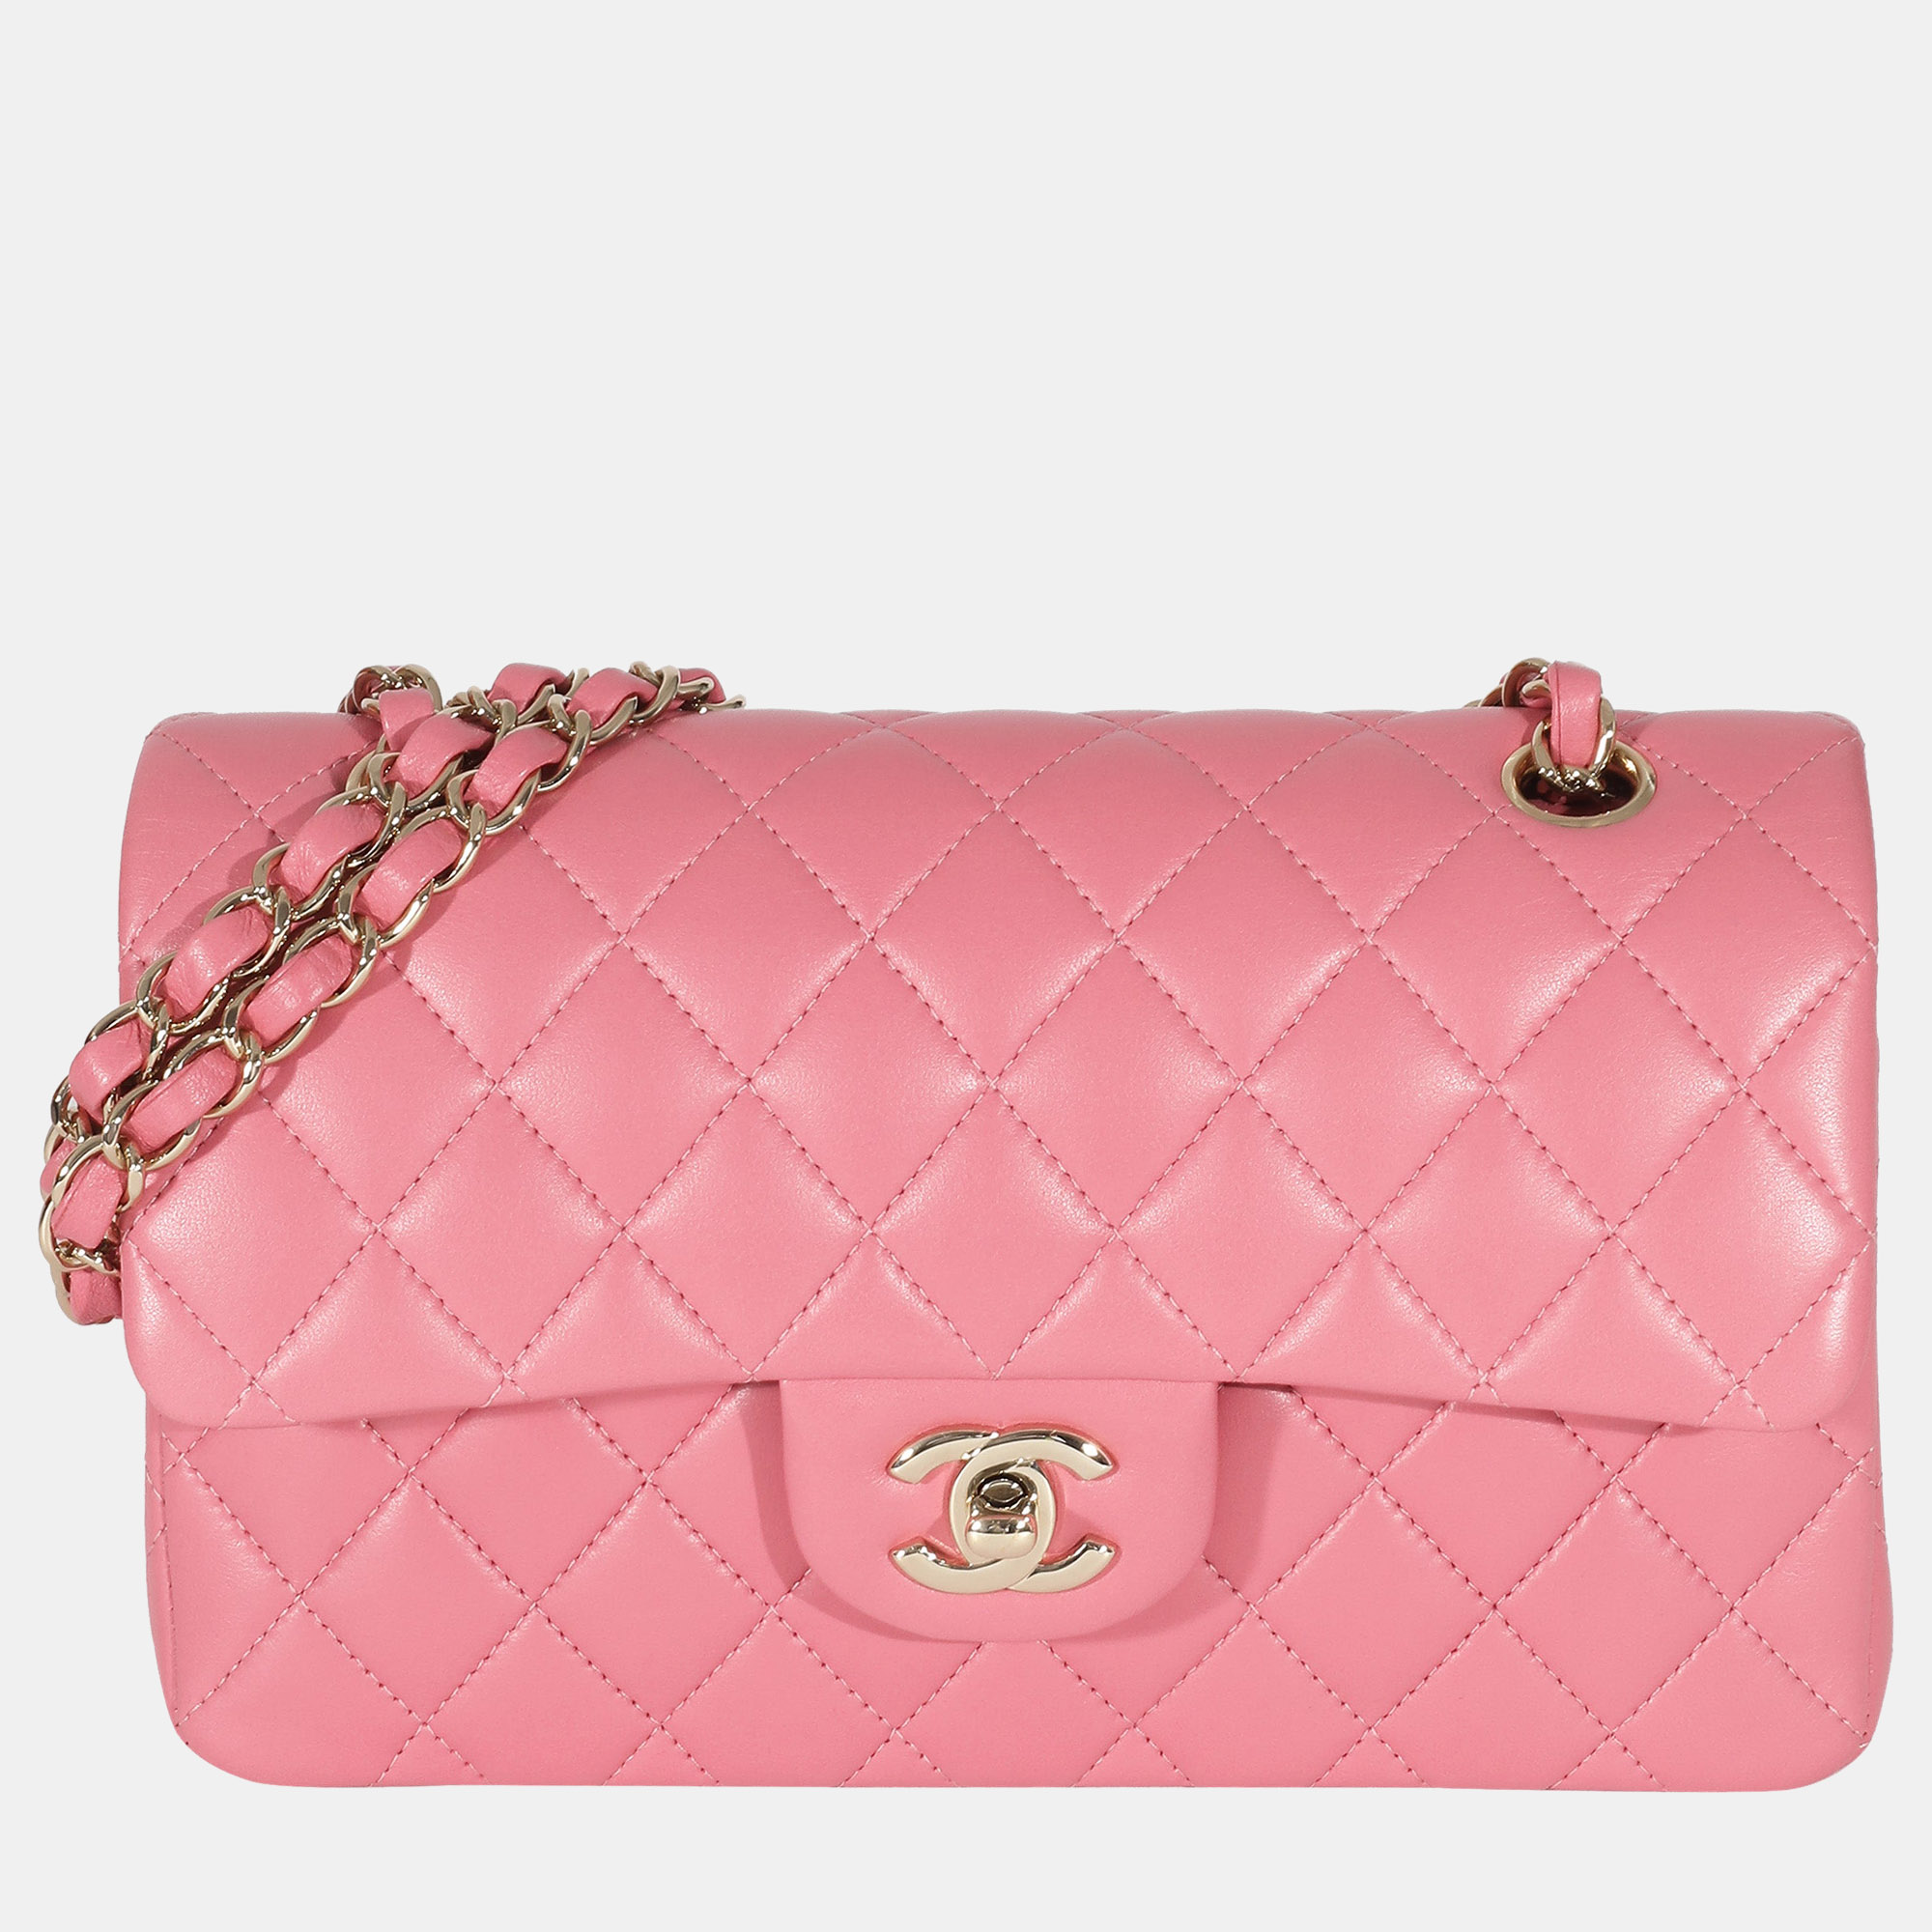 Chanel Pink Lambskin Leather Small Classic Double Flap Shoulder Bag